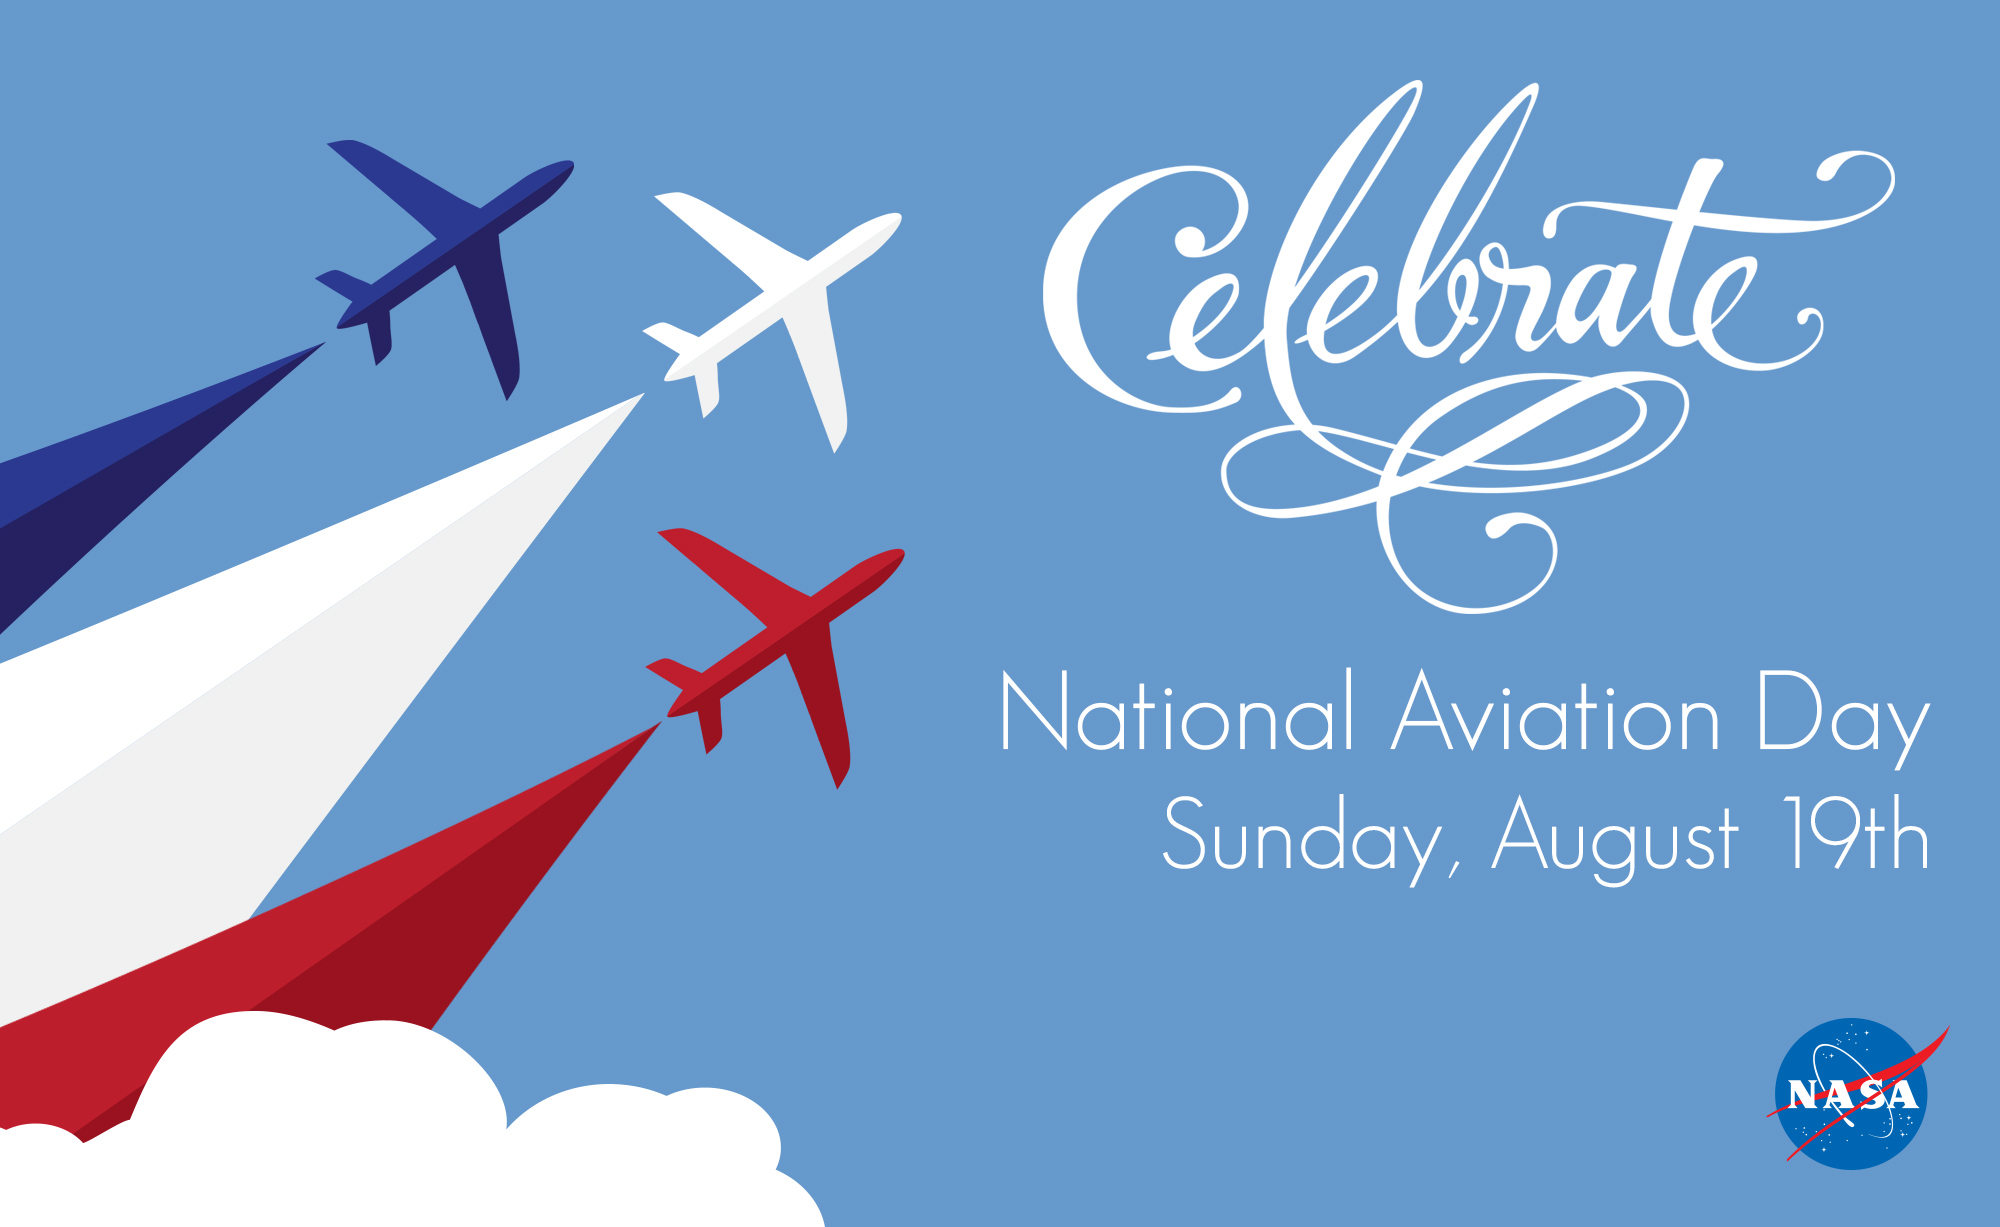 Celebrate National Aviation Day, Sunday, August 19th.